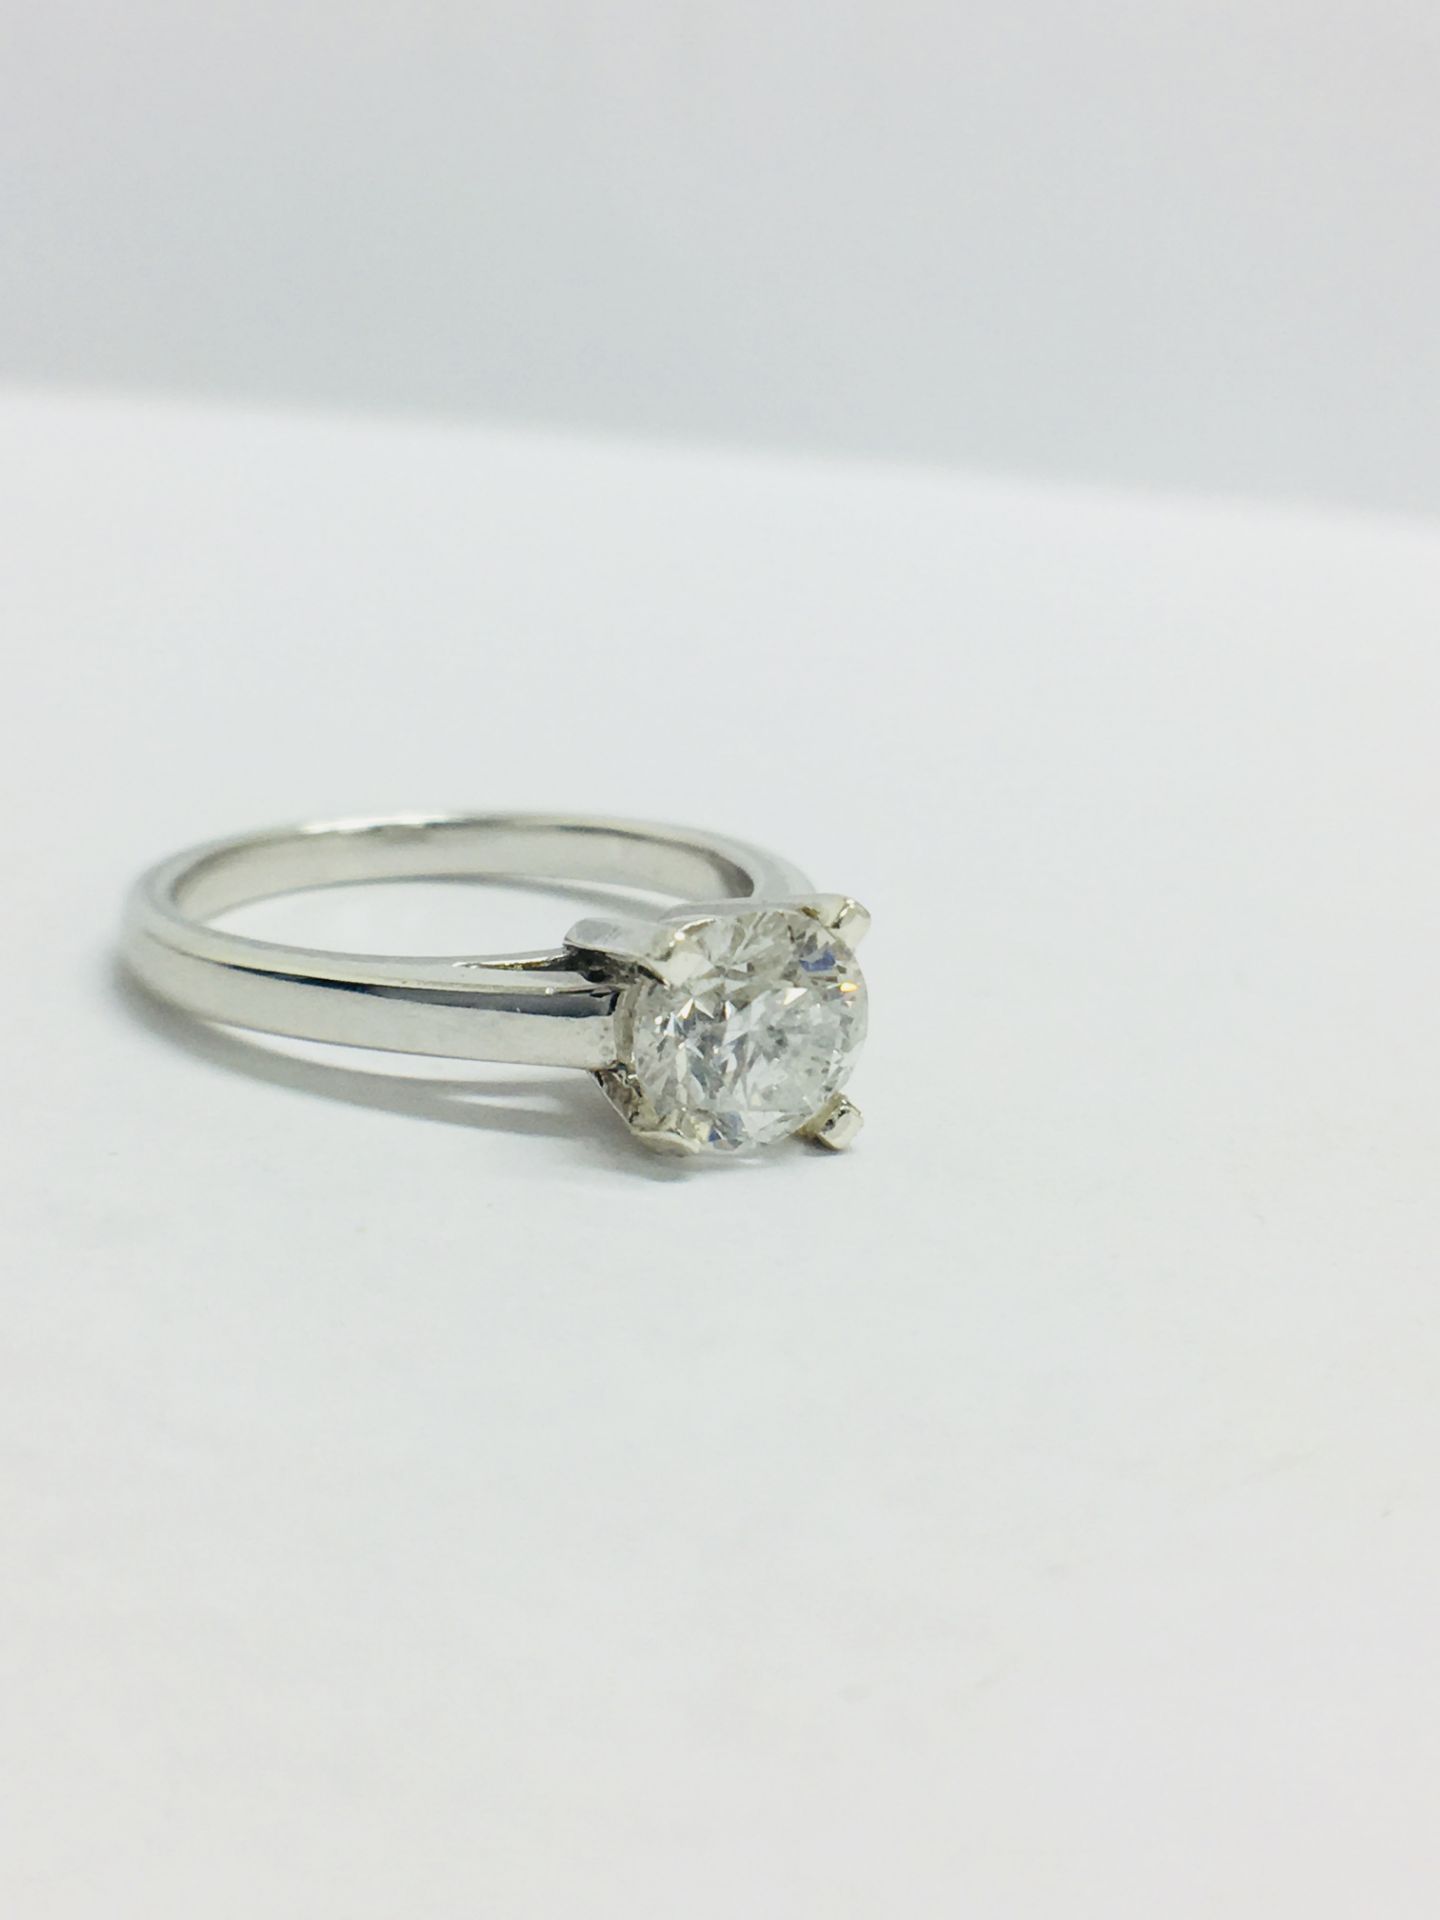 1.05Ct Diamond Solitaire Ring With A Brilliant Cut Diamond. - Image 7 of 9